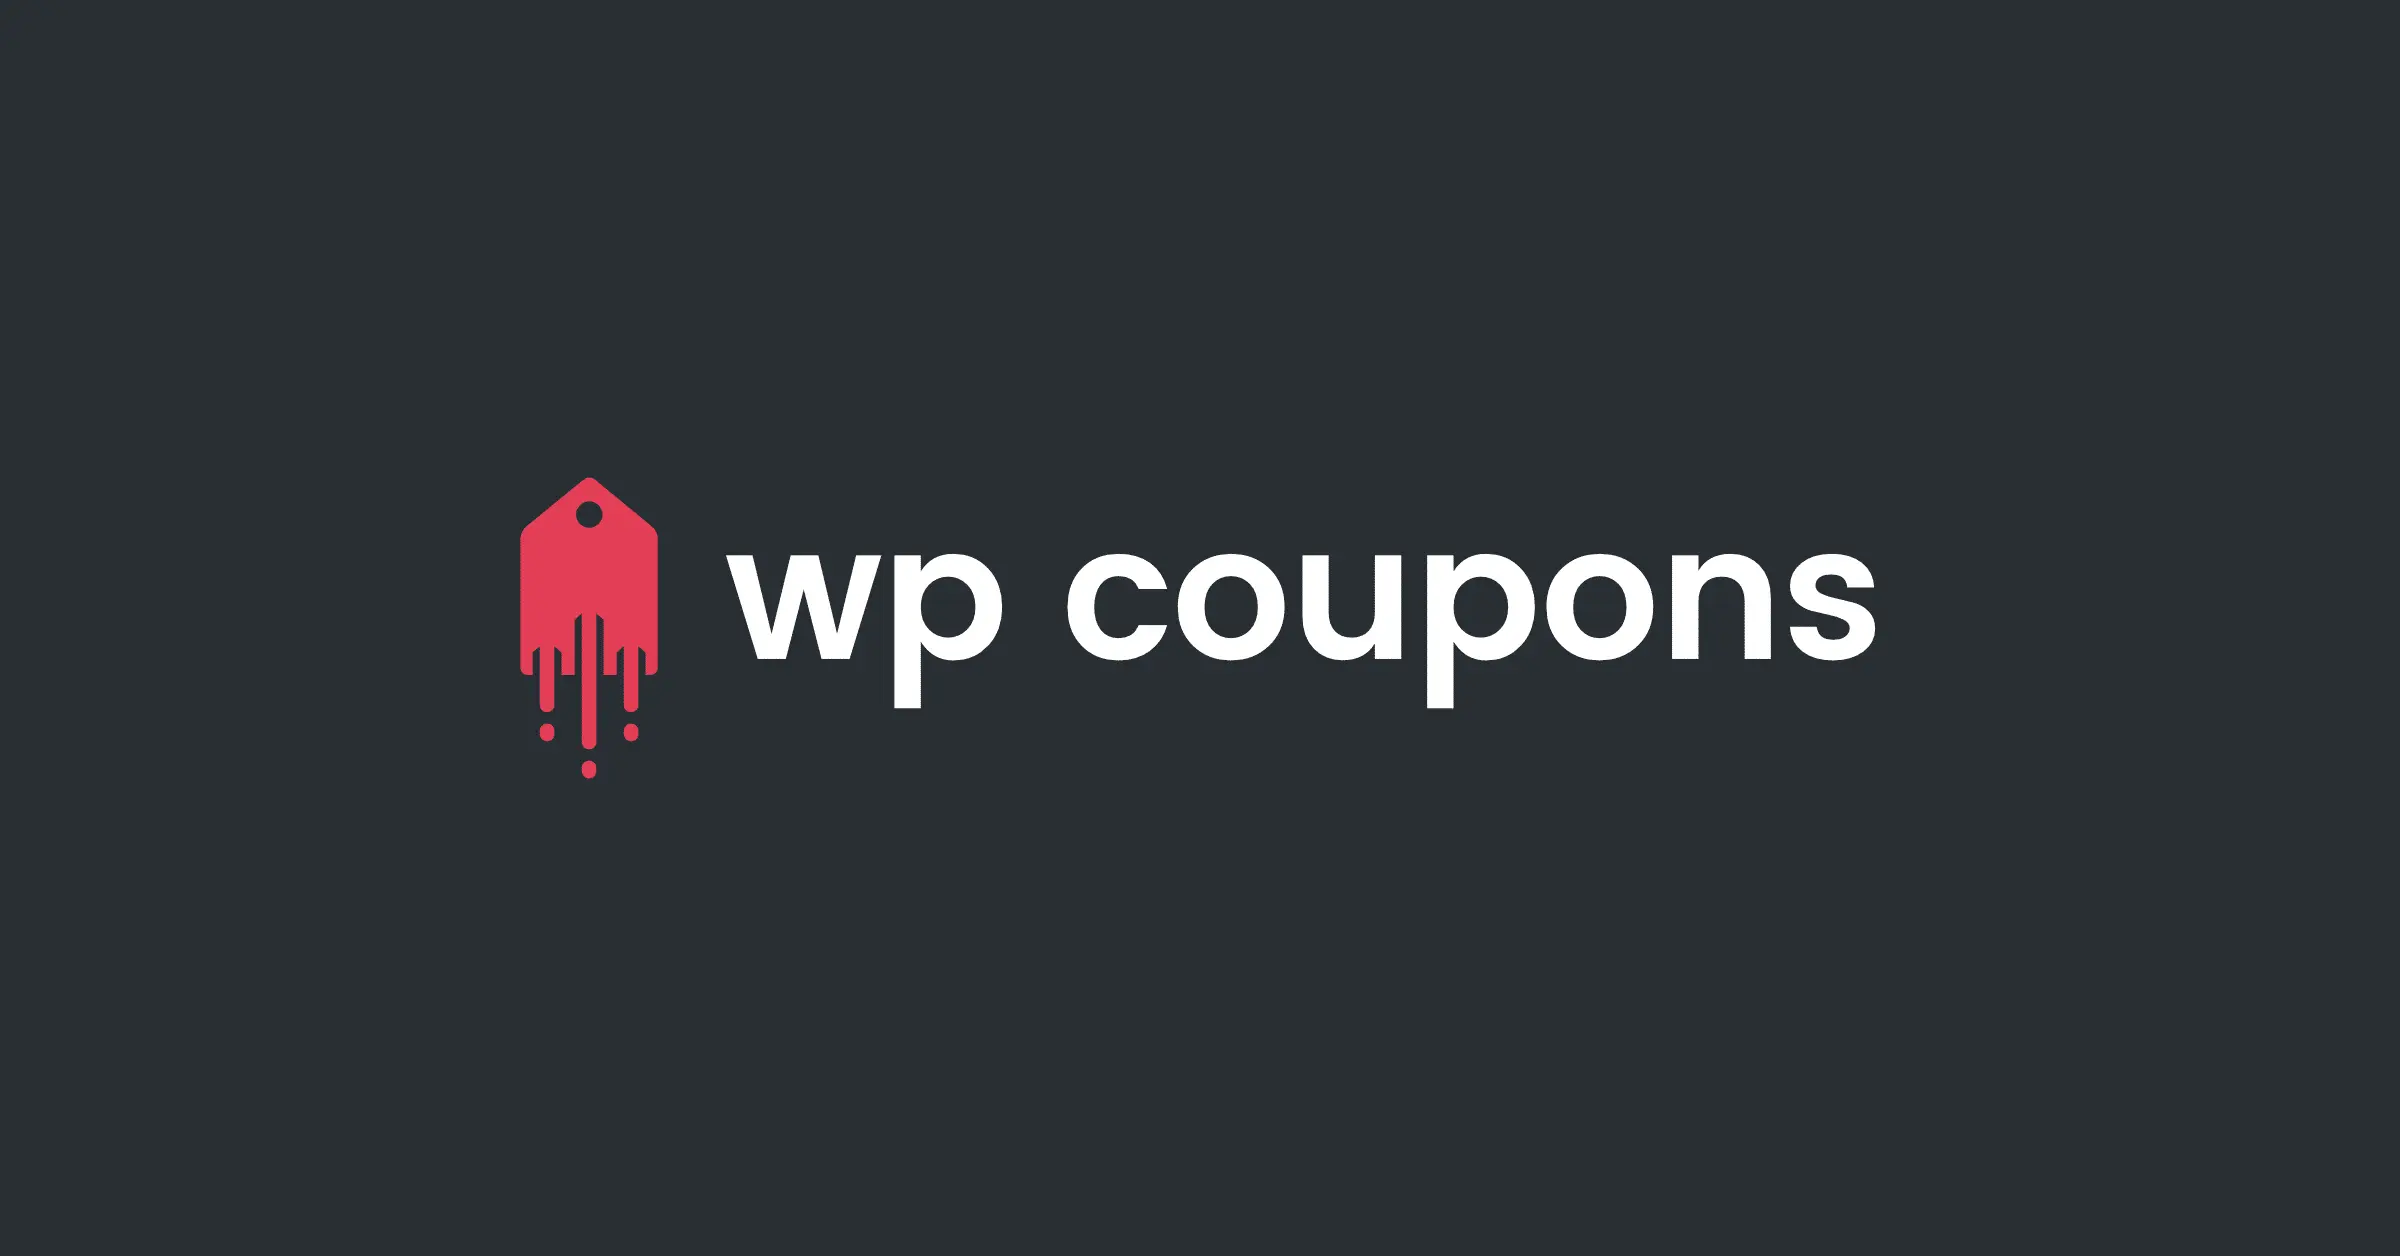 Download the WP Coupons plugin